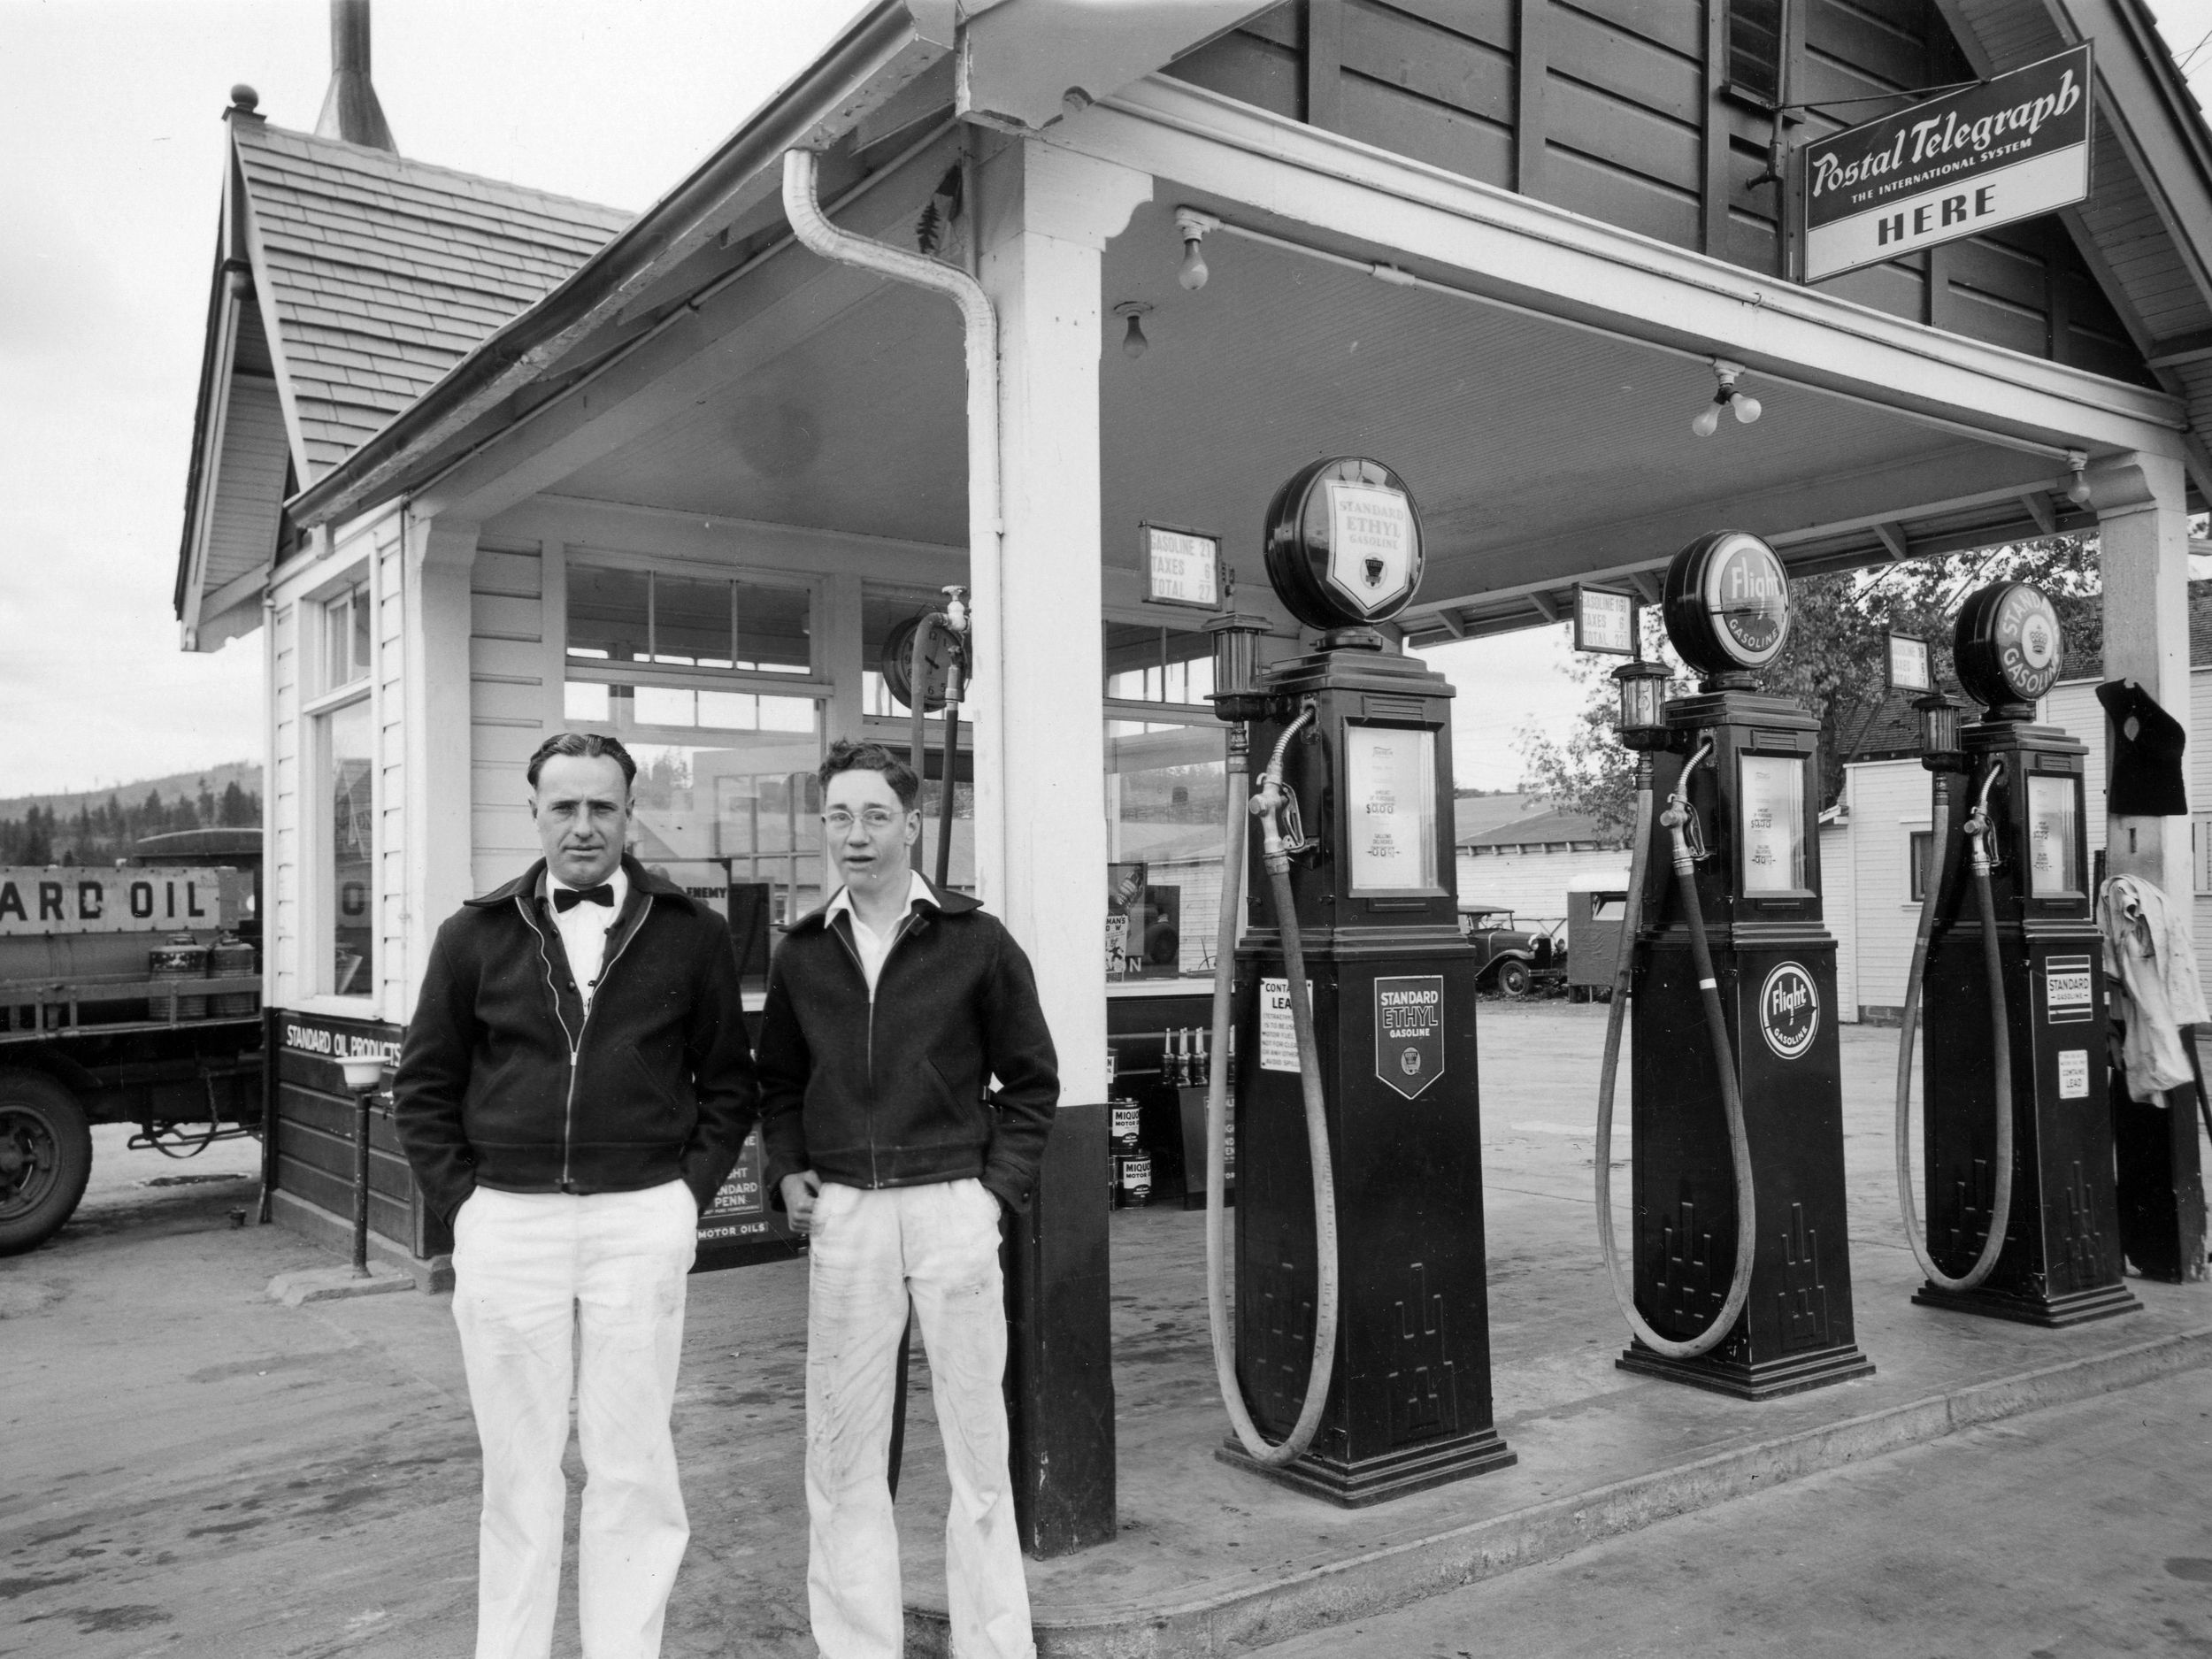 Then & Now: Service stations popular until 1970s